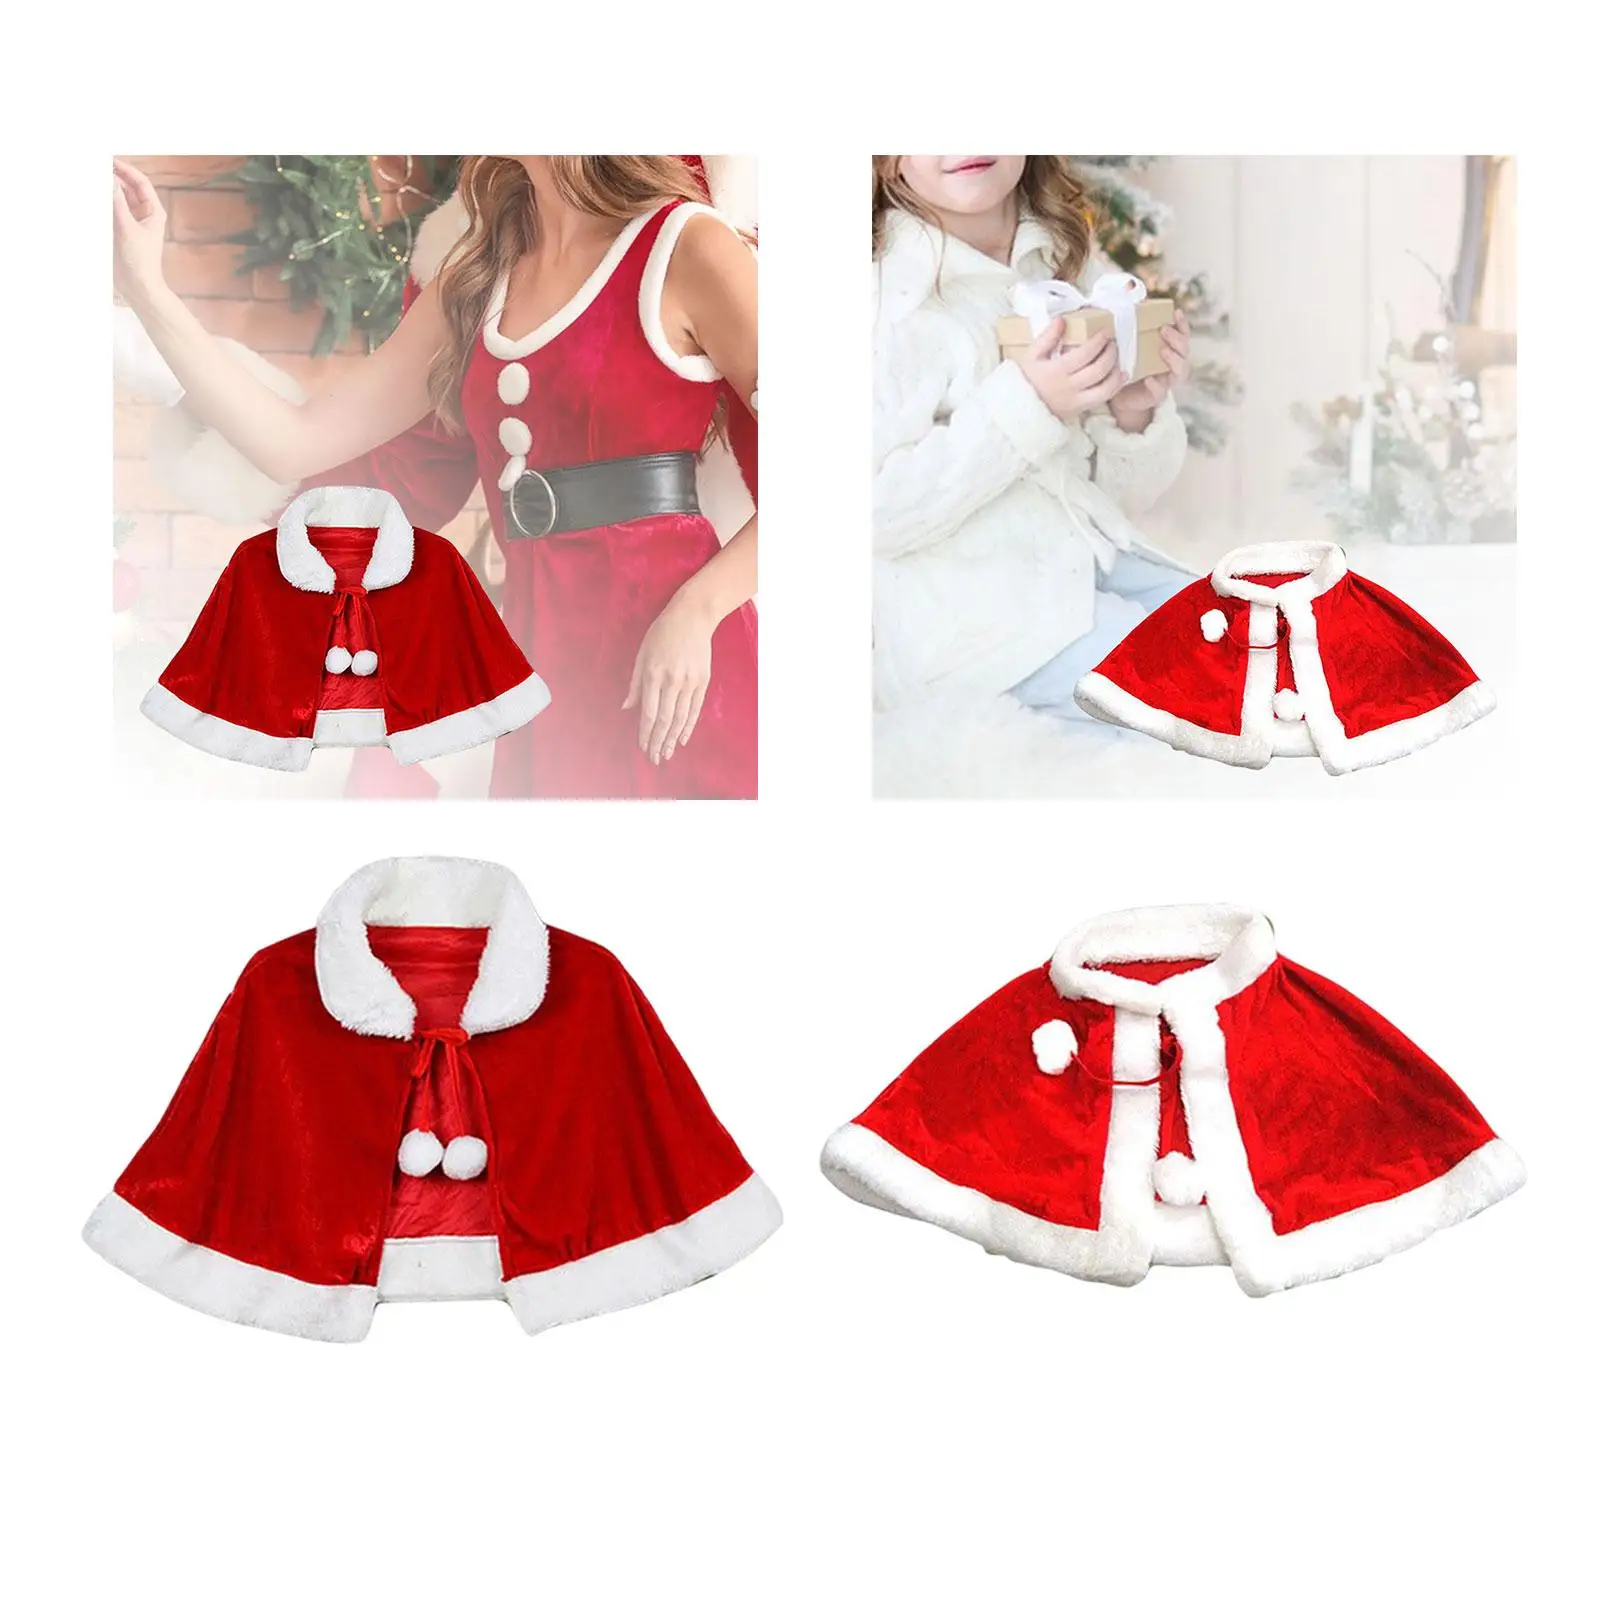 Red Velvet Cape Shawl Women Girls Dress up Christmas Costume Cloak for Party Xmas Carnival Festival Stage Performance